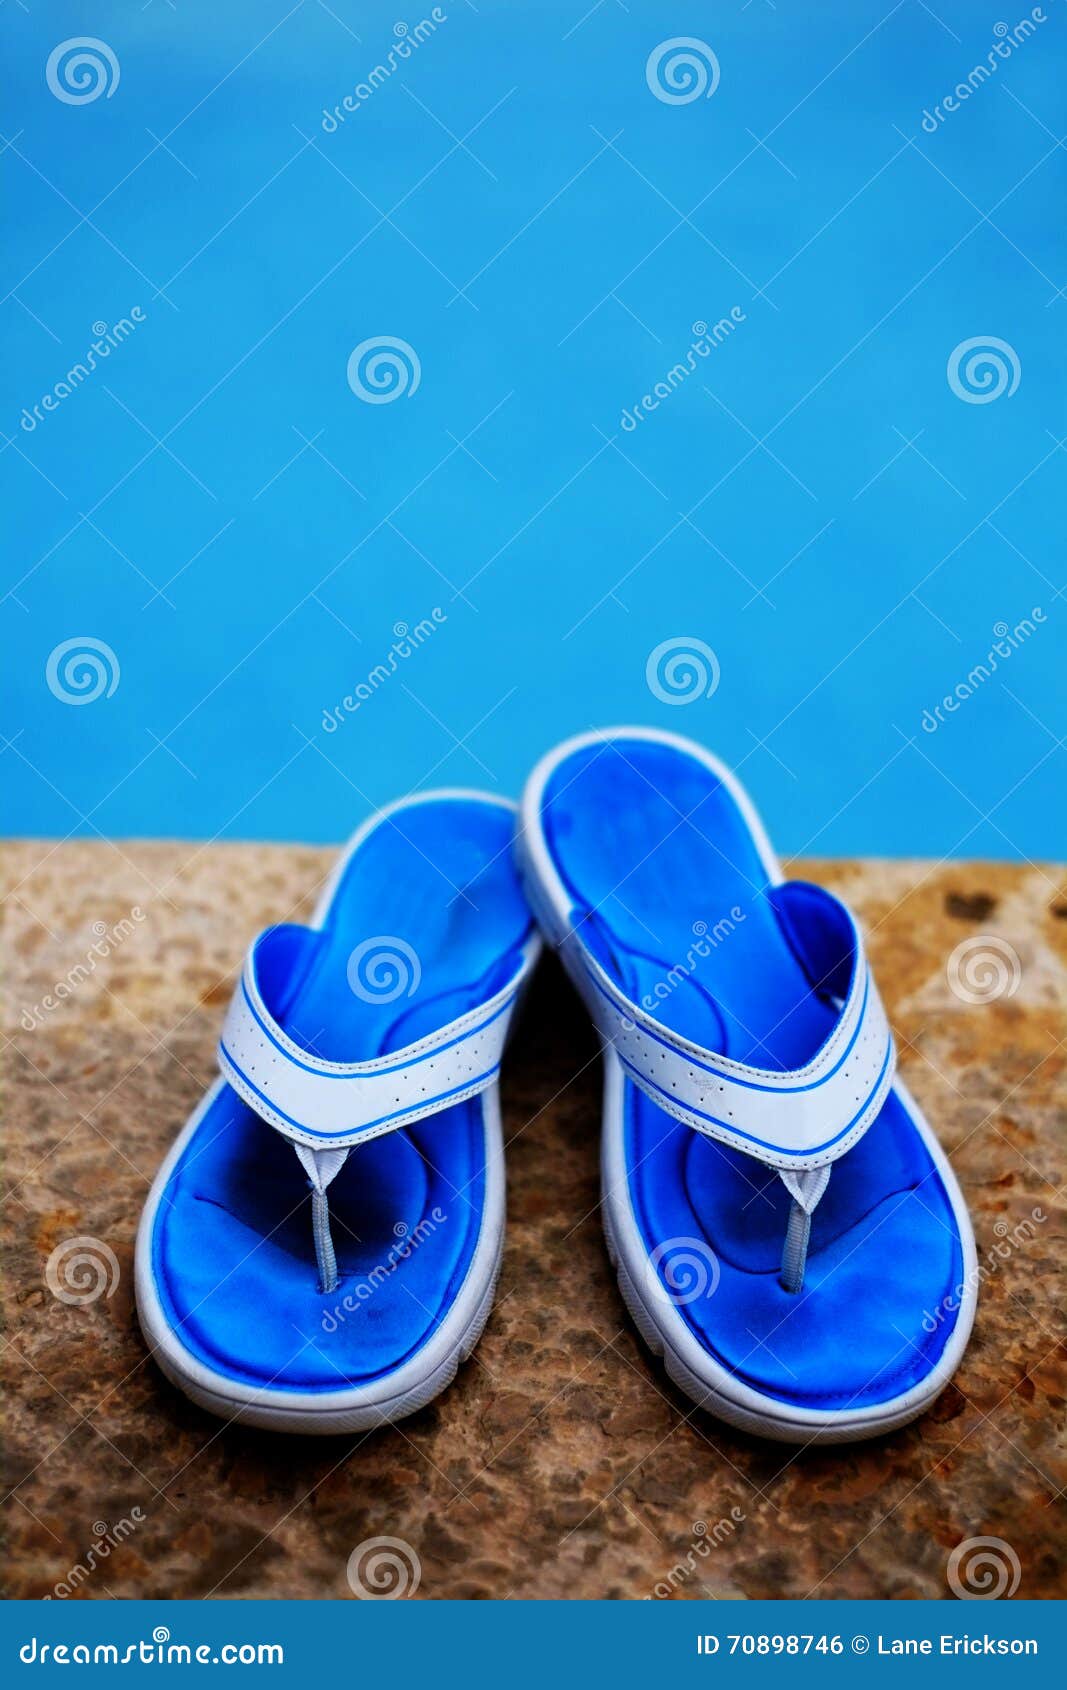 Blue Flip Flops Next To Swimming Pool Stock Photo - Image of relaxation ...